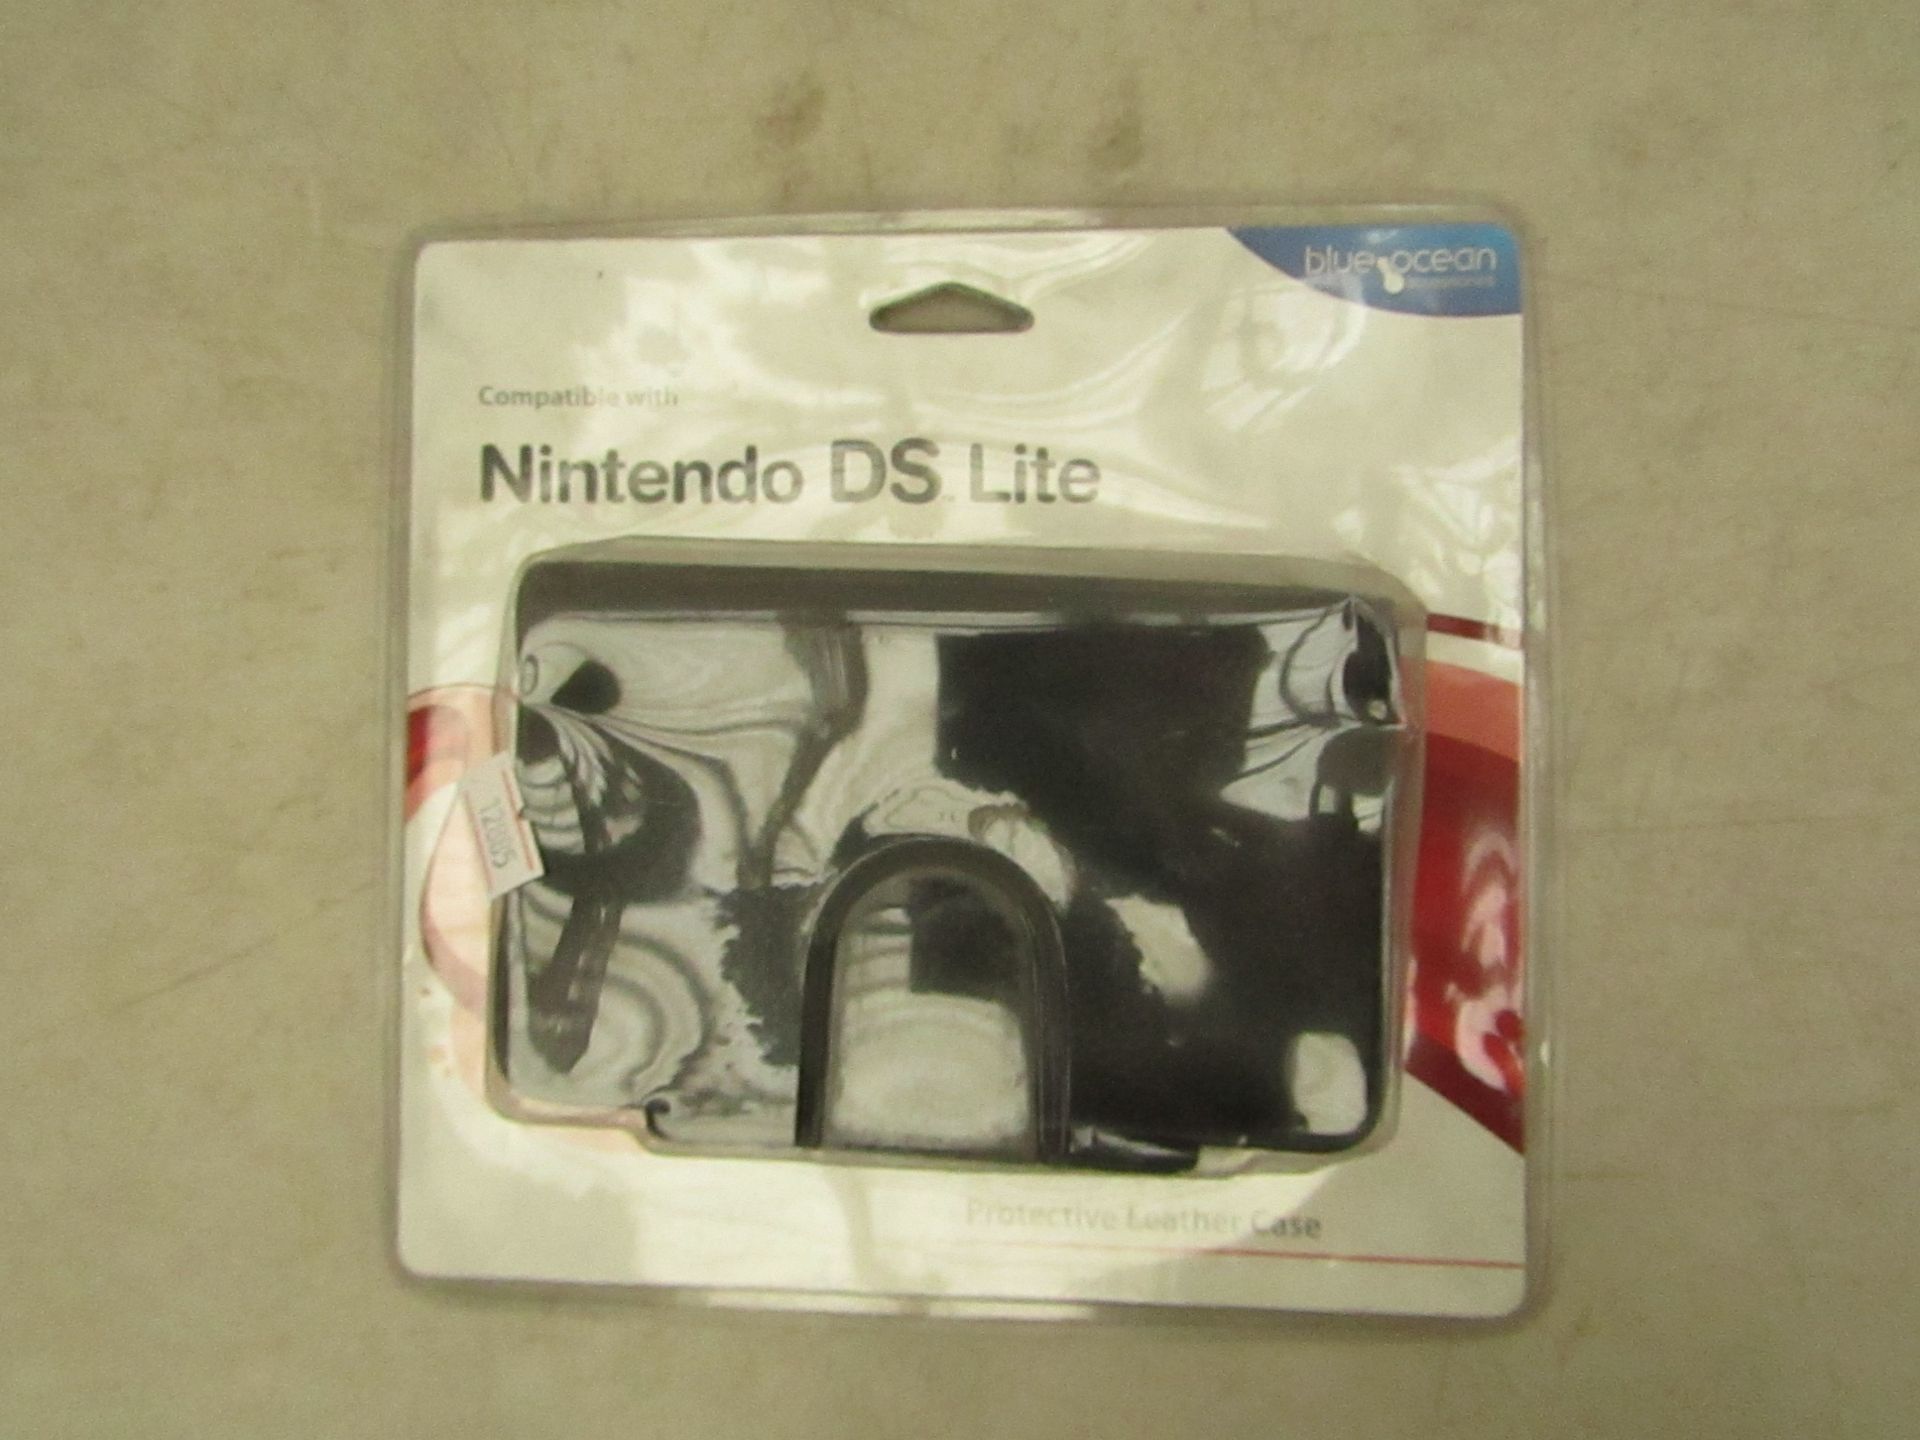 6x Nintendo DS Lite case, all new and packaged.